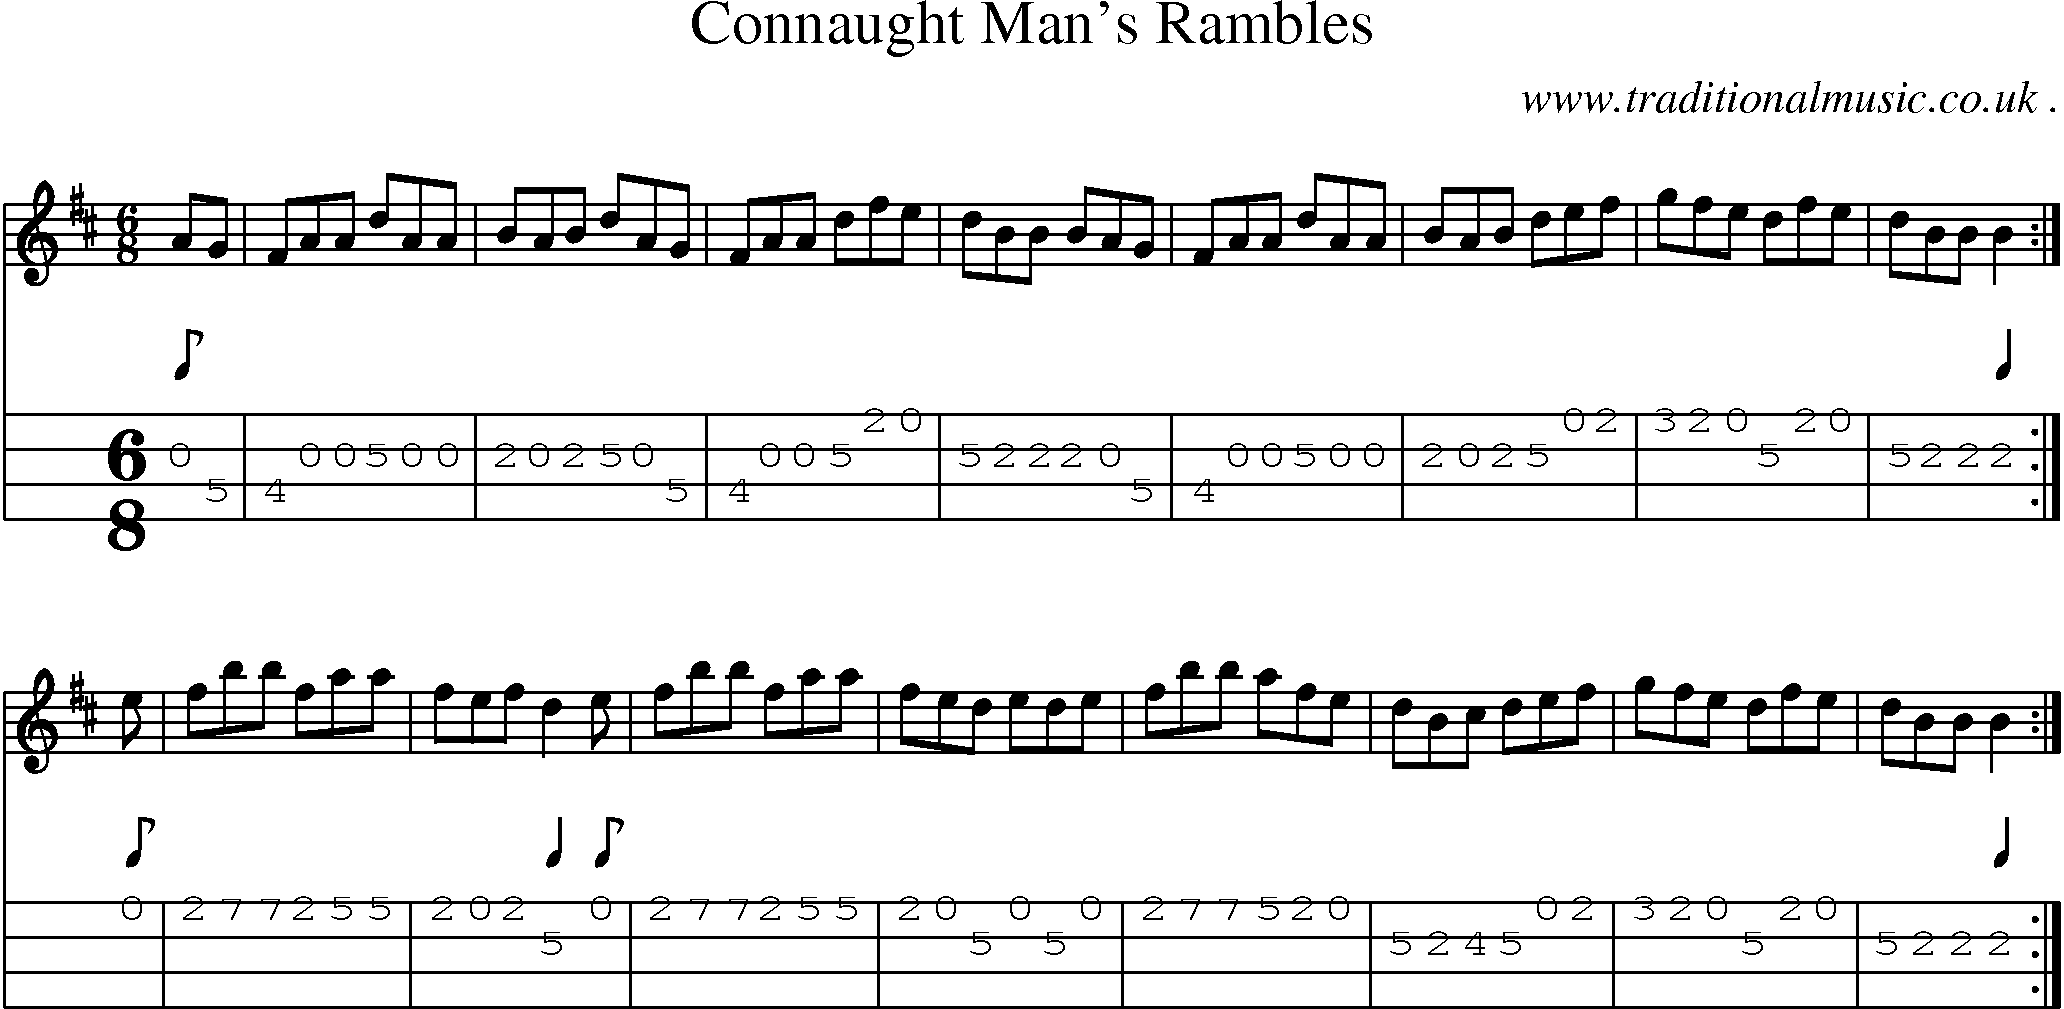 Sheet-Music and Mandolin Tabs for Connaught Mans Rambles